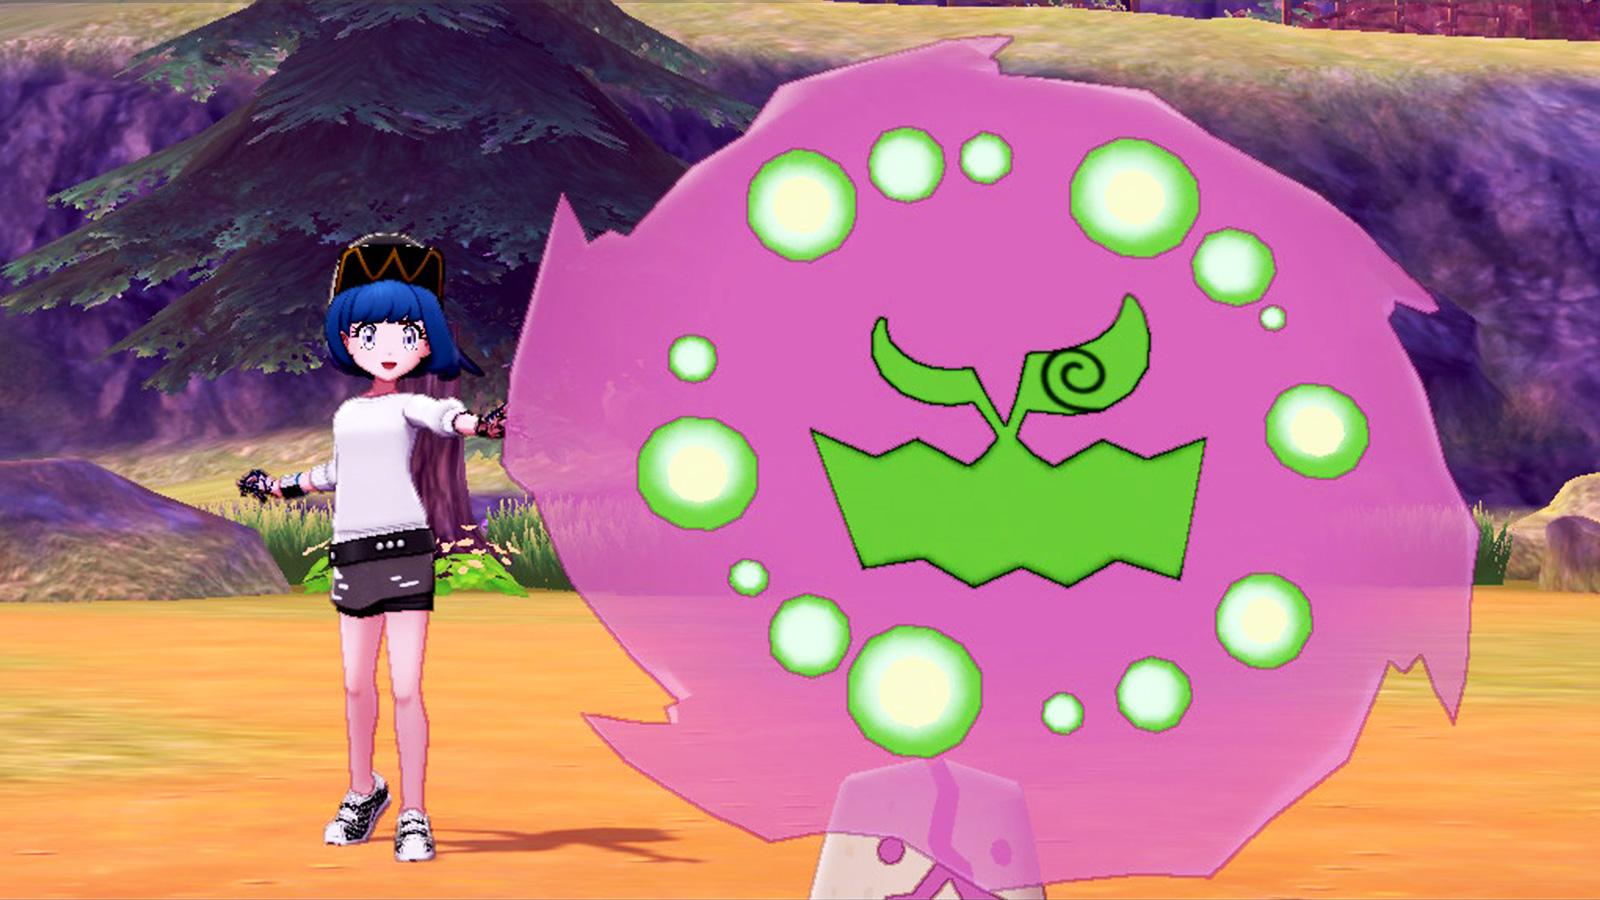 Live] Shiny Spiritomb after a not so scary 1,132 Encounters in The Crown  Tundra DLC Pokémon Sword! 